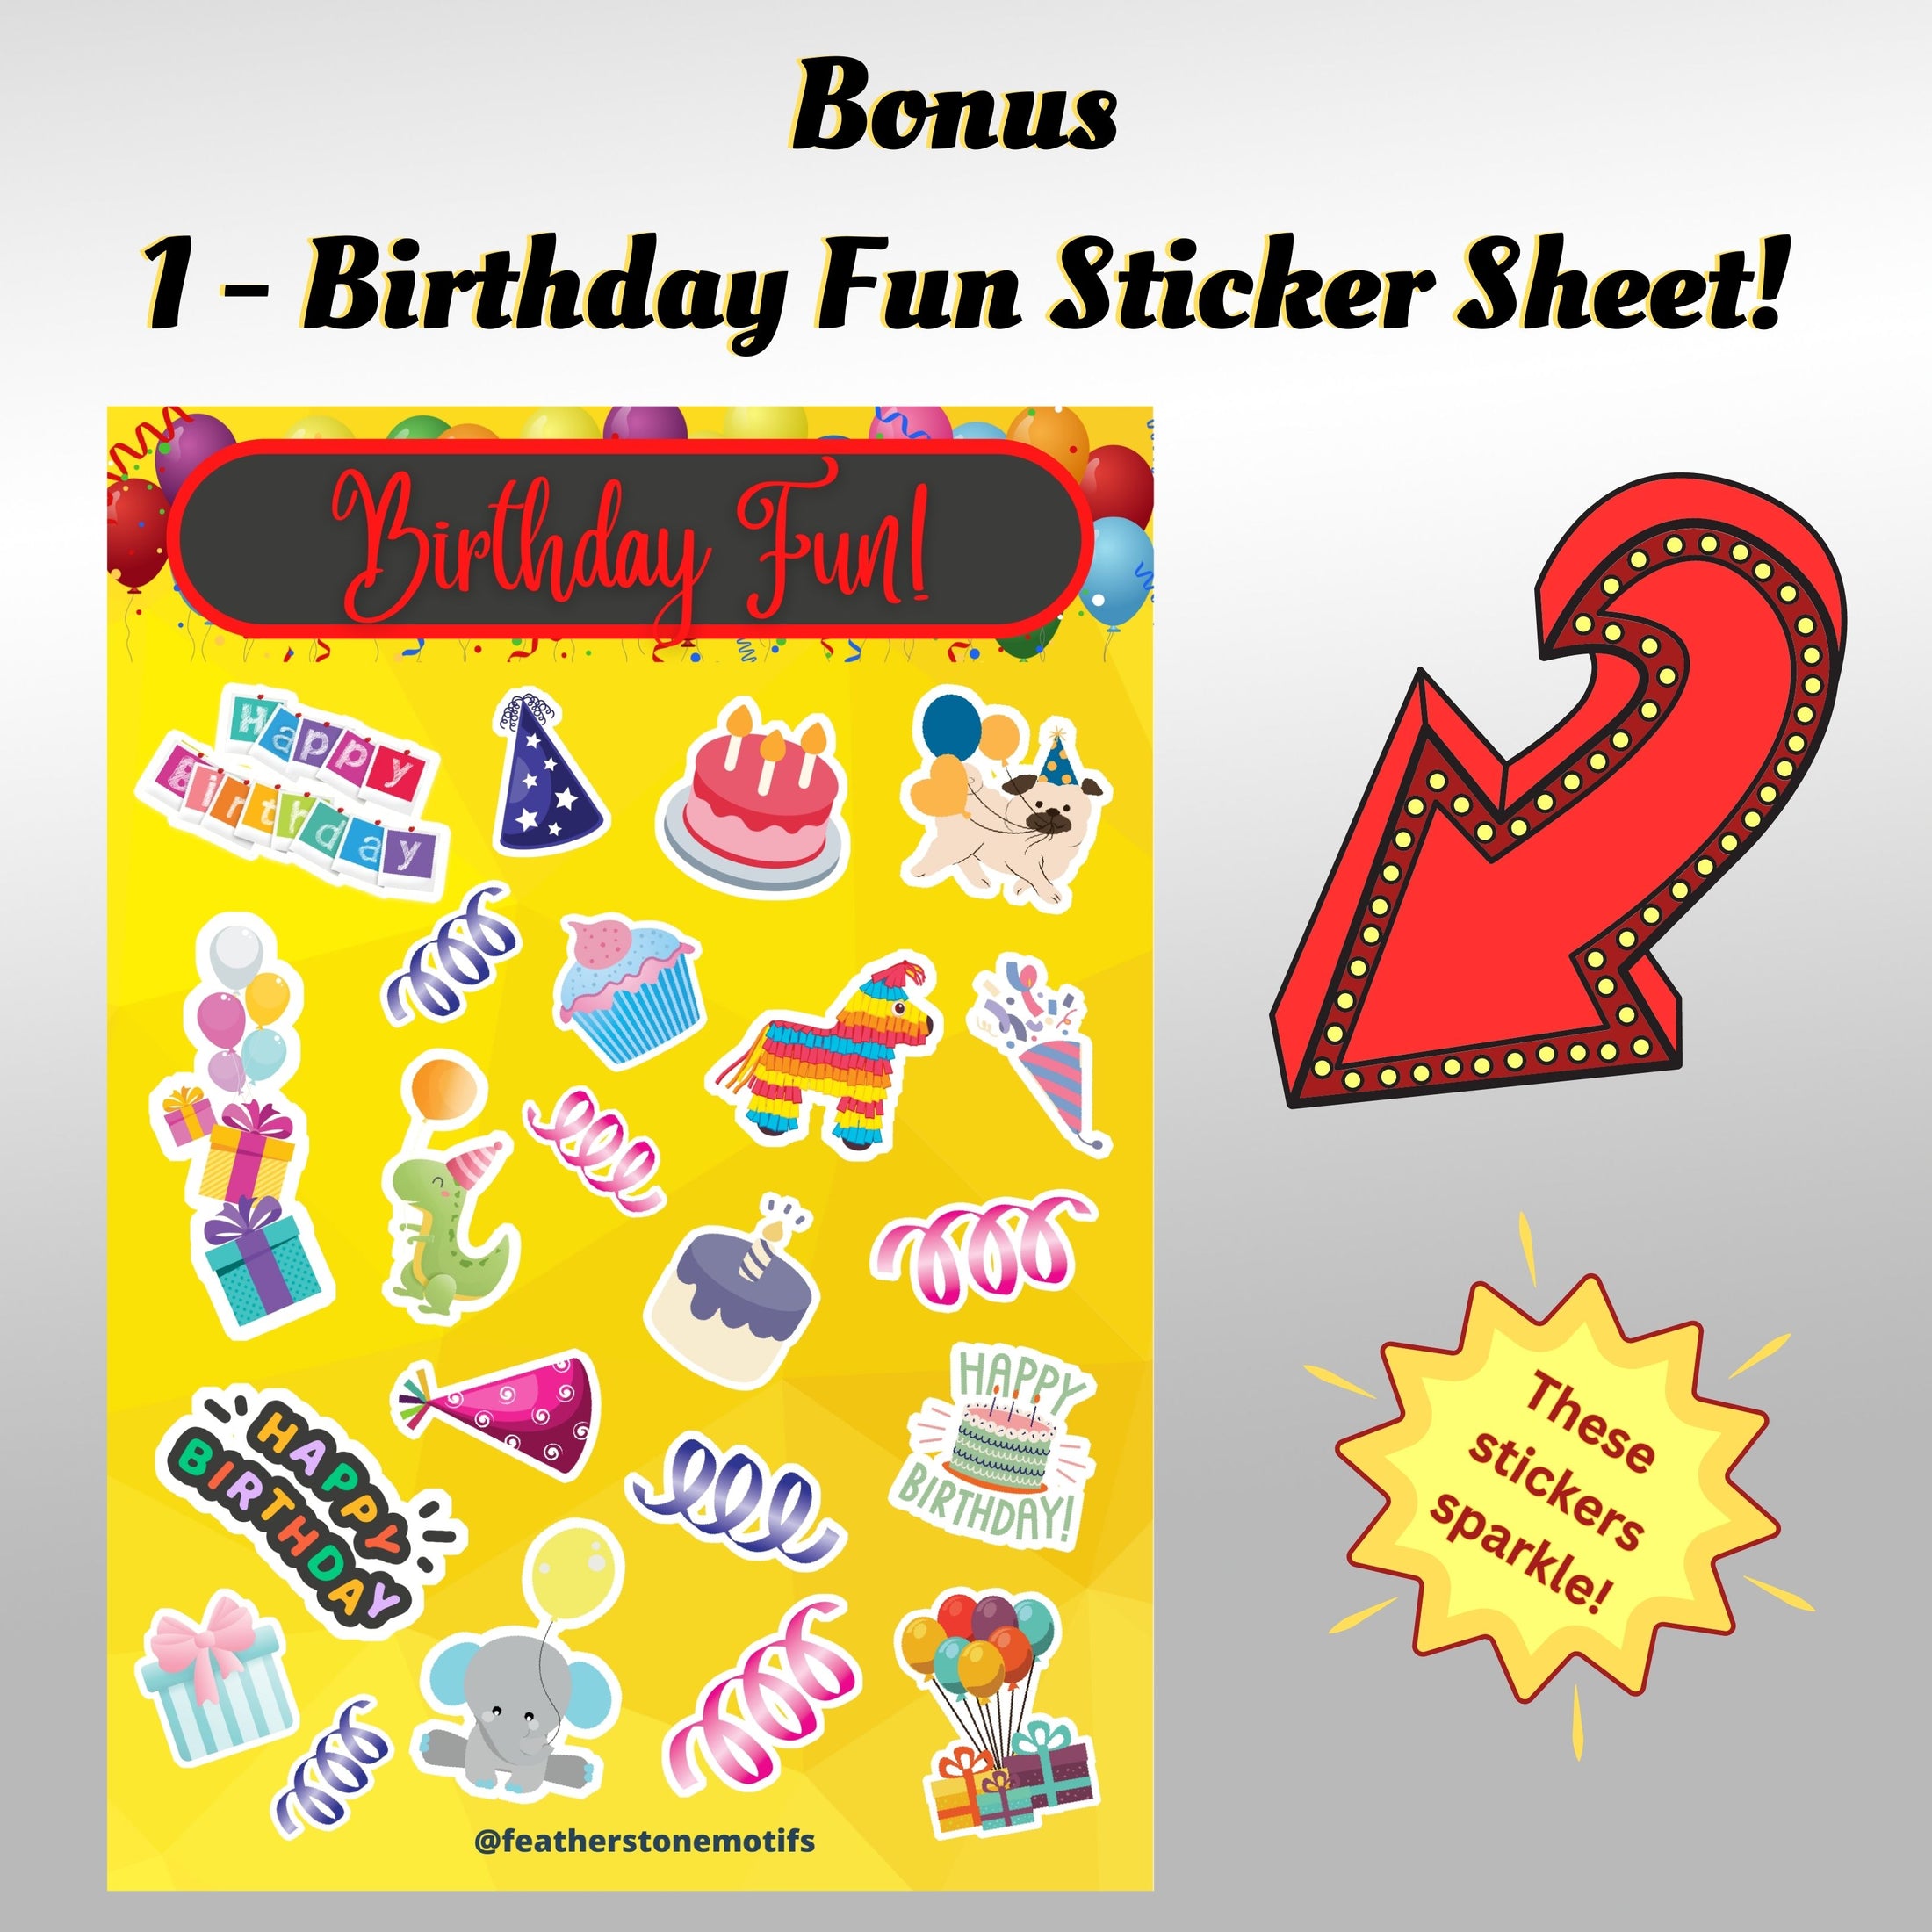 This image shows the Birthday Fun sticker sheet that is included with each order. 